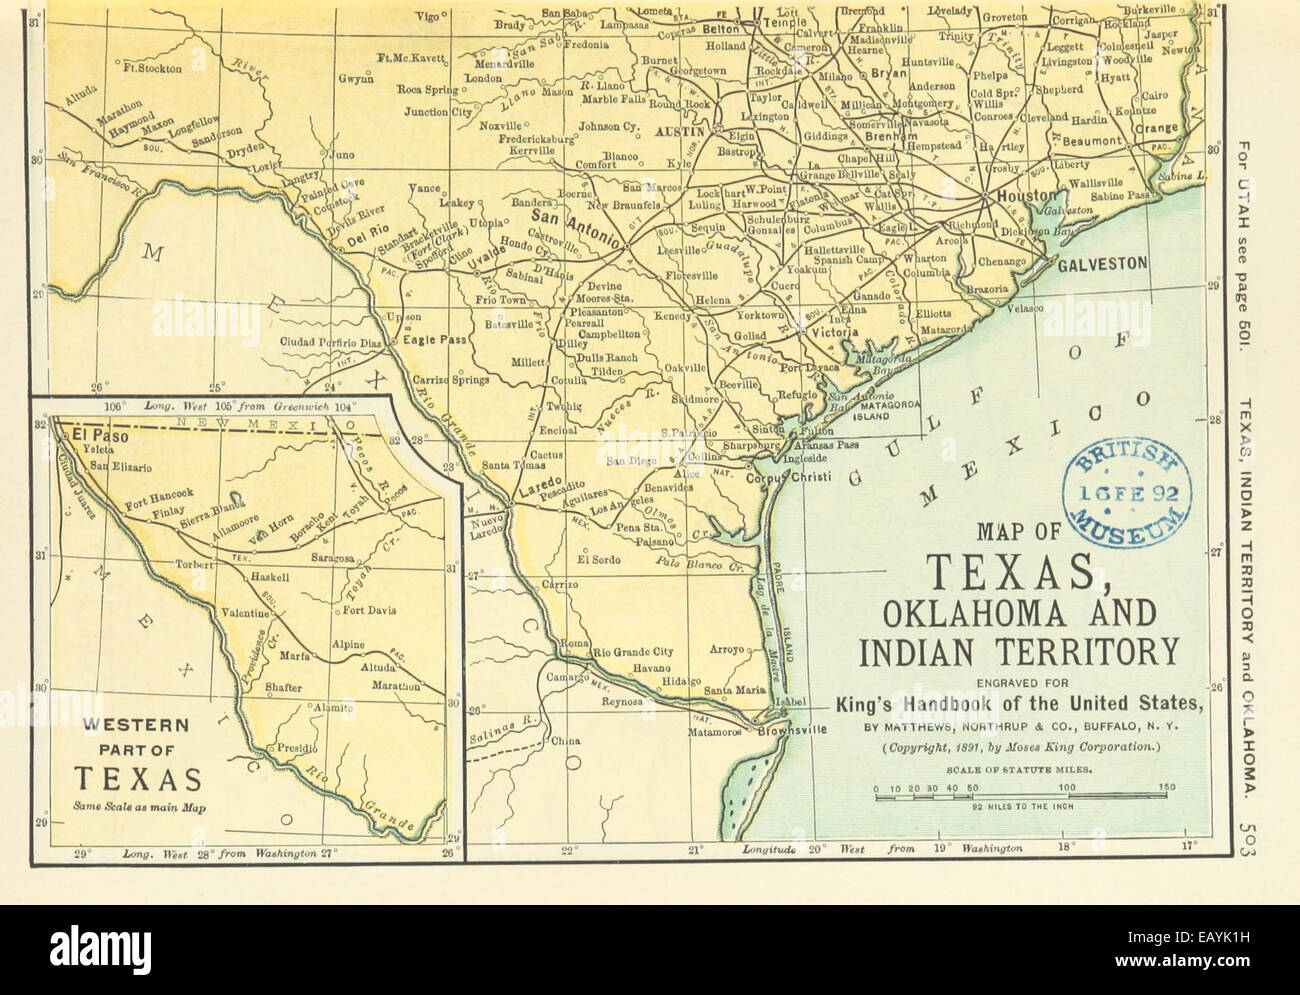 US-MAPS(1891) p505 - MAP OF TEXAS, OKLAHOMA AND INDIAN TERRITORY (r) Stock Photo